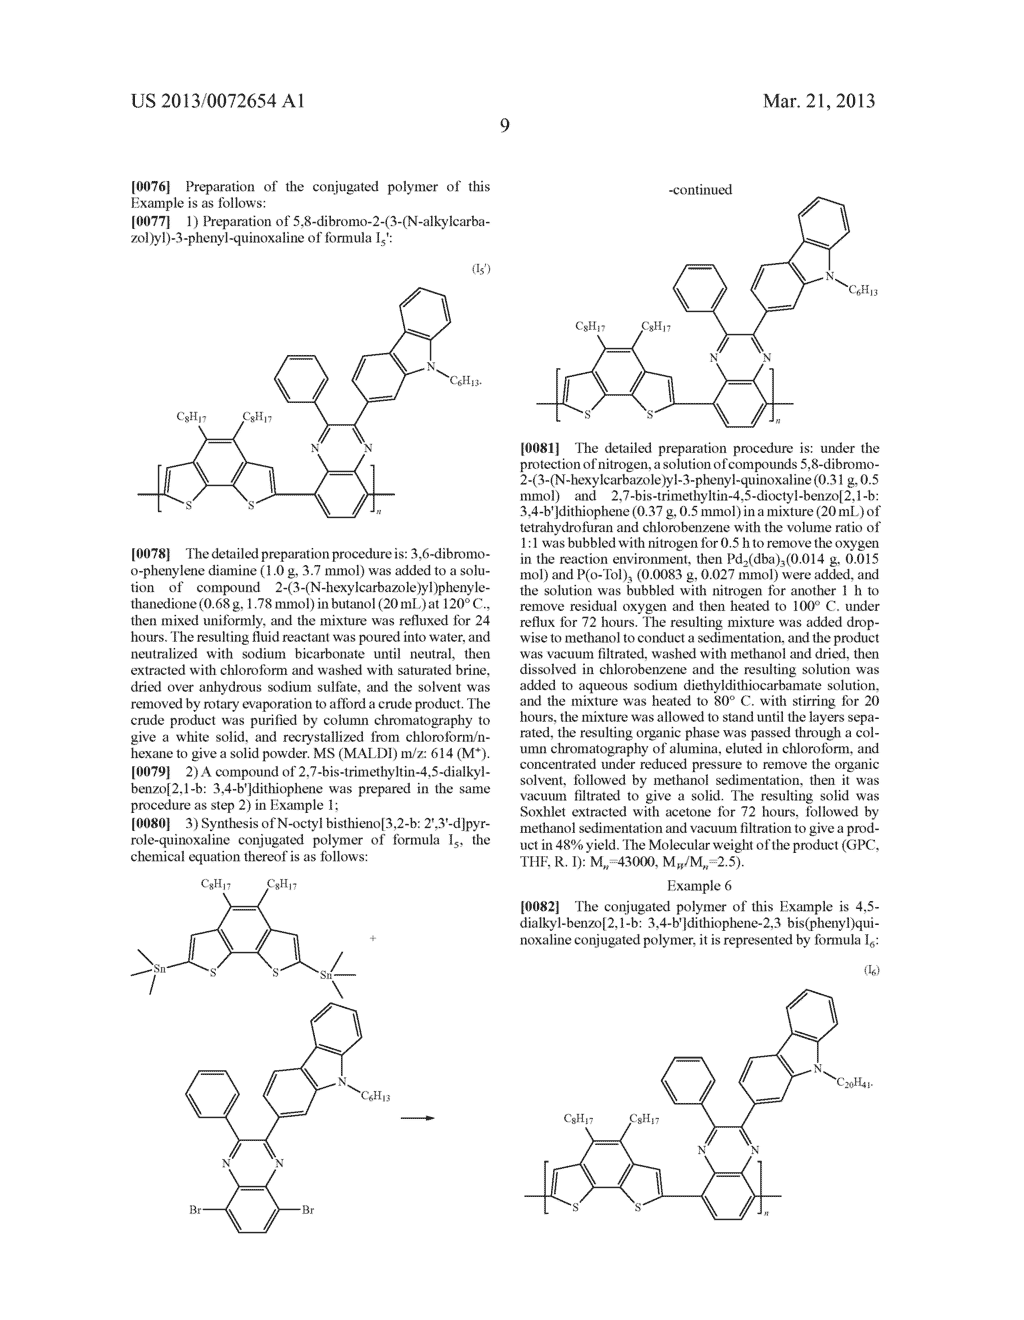 QUINOXALINE CONJUGATED POLYMER CONTAINING FUSED-RING THIOPHENE UNIT,     PREPARATION METHOD AND USES THEREOF - diagram, schematic, and image 12